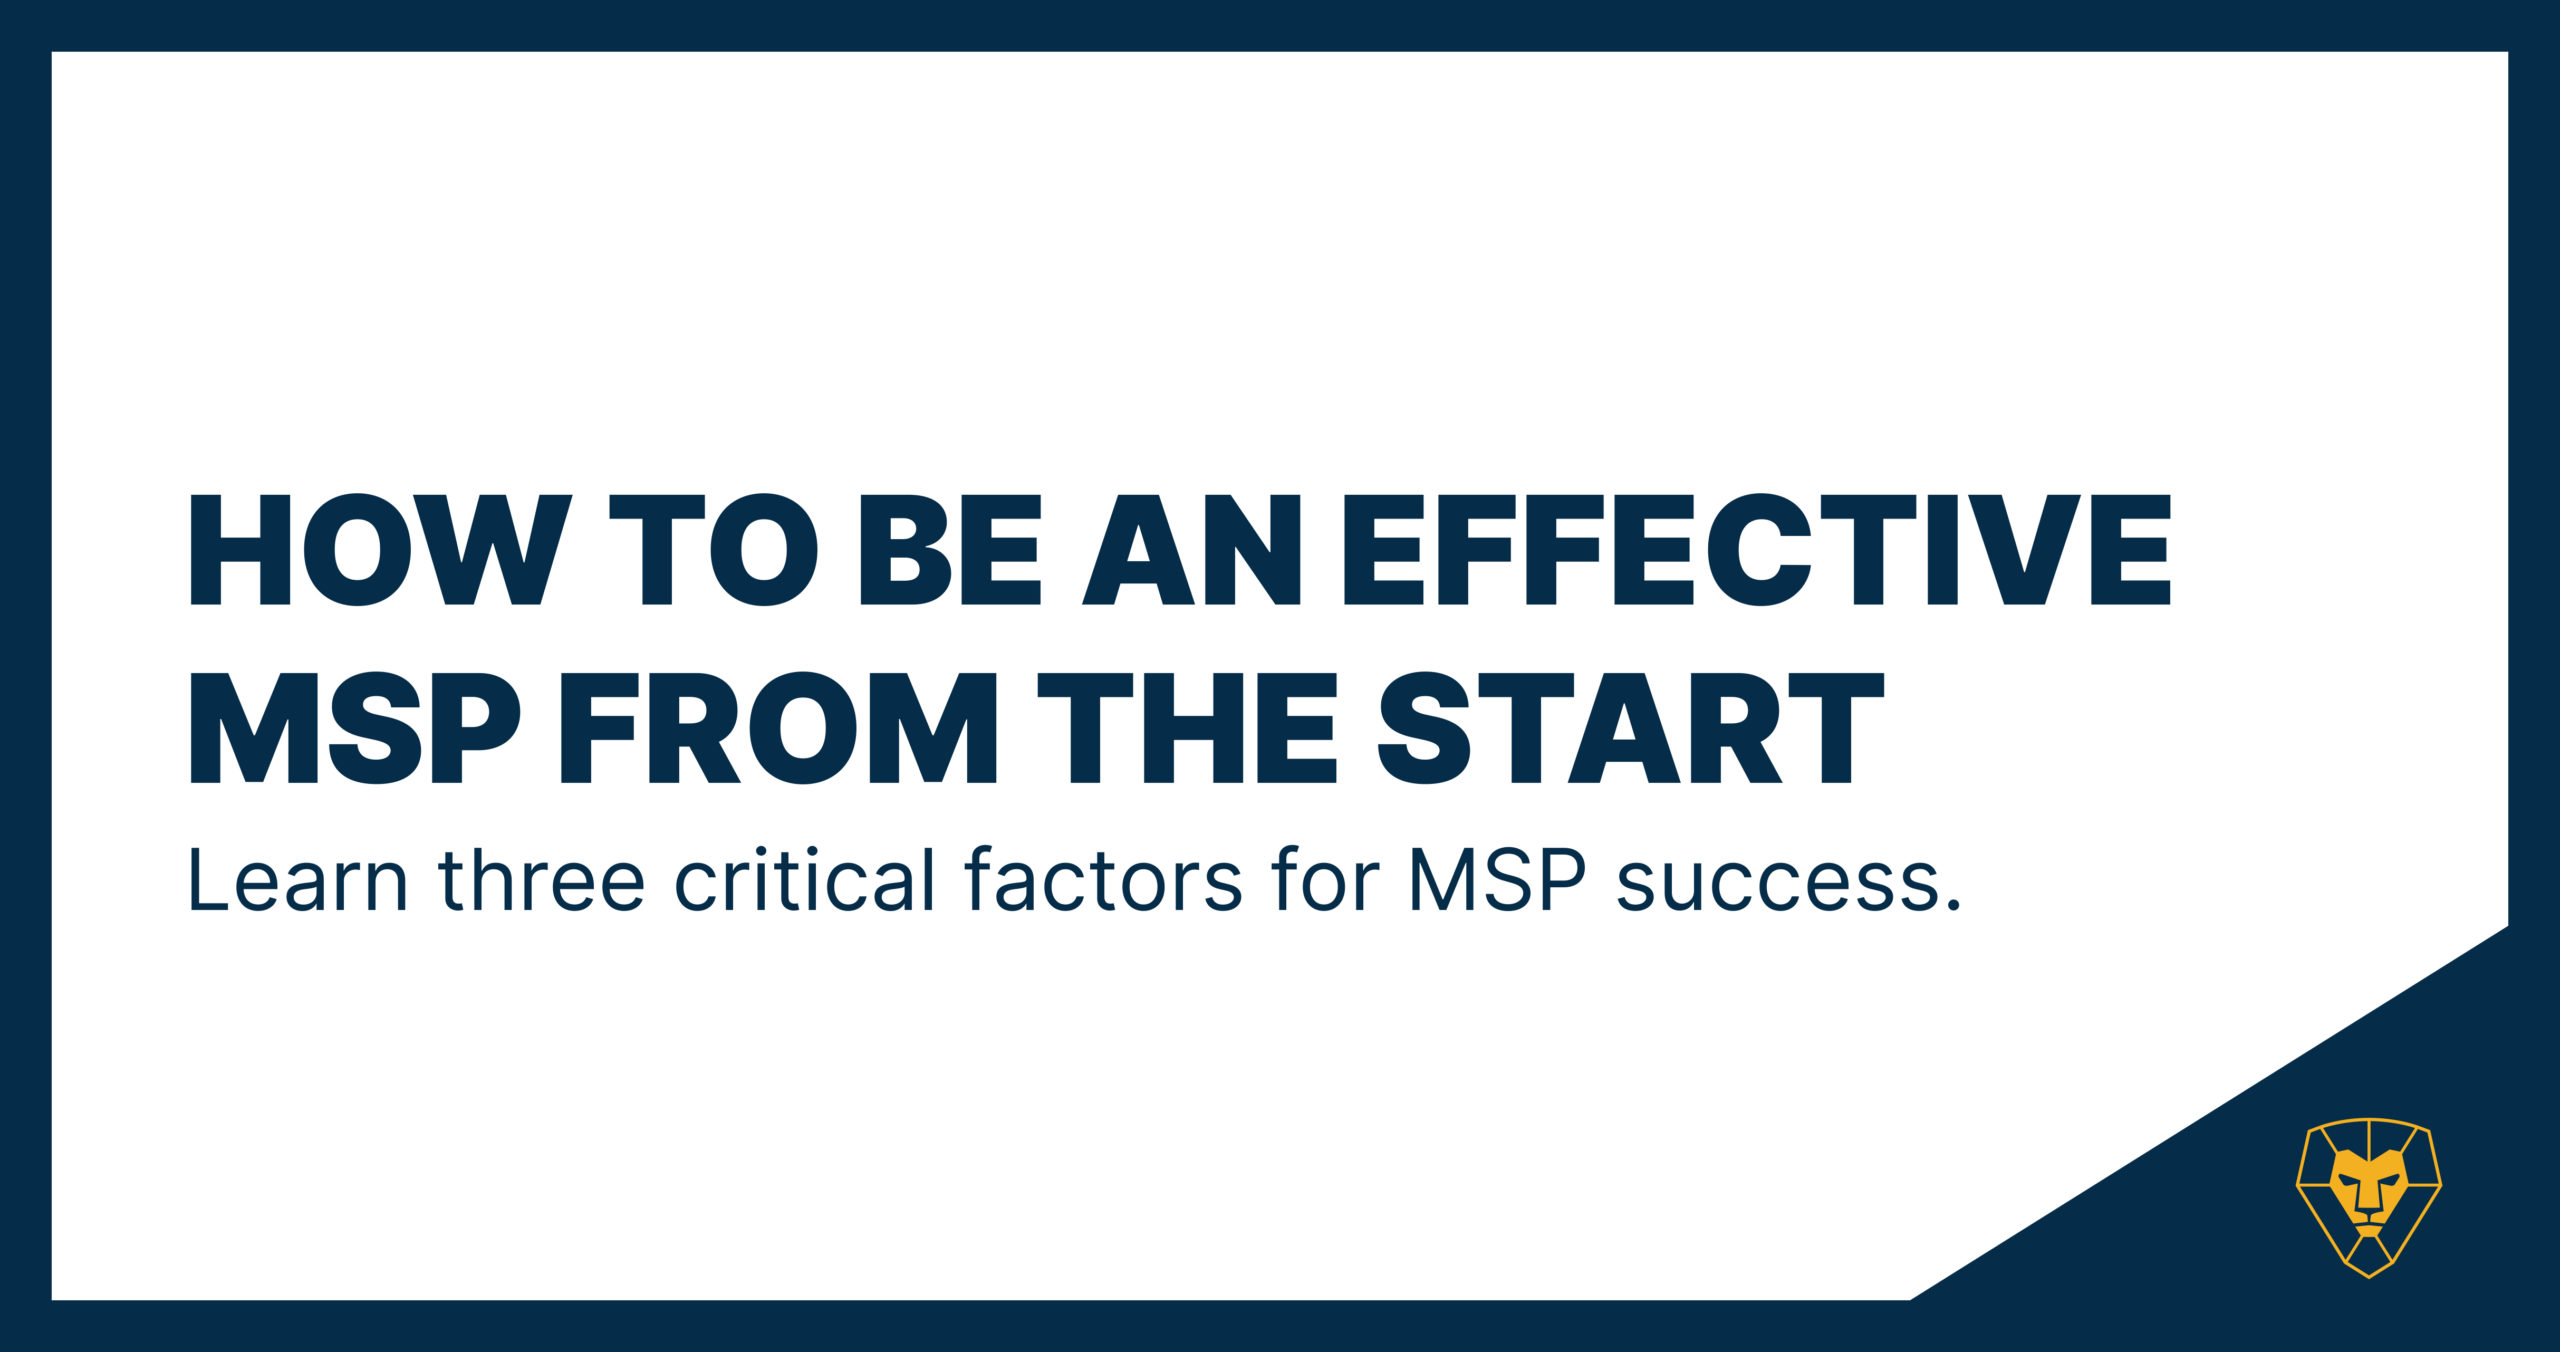 Effective MSP from the Start